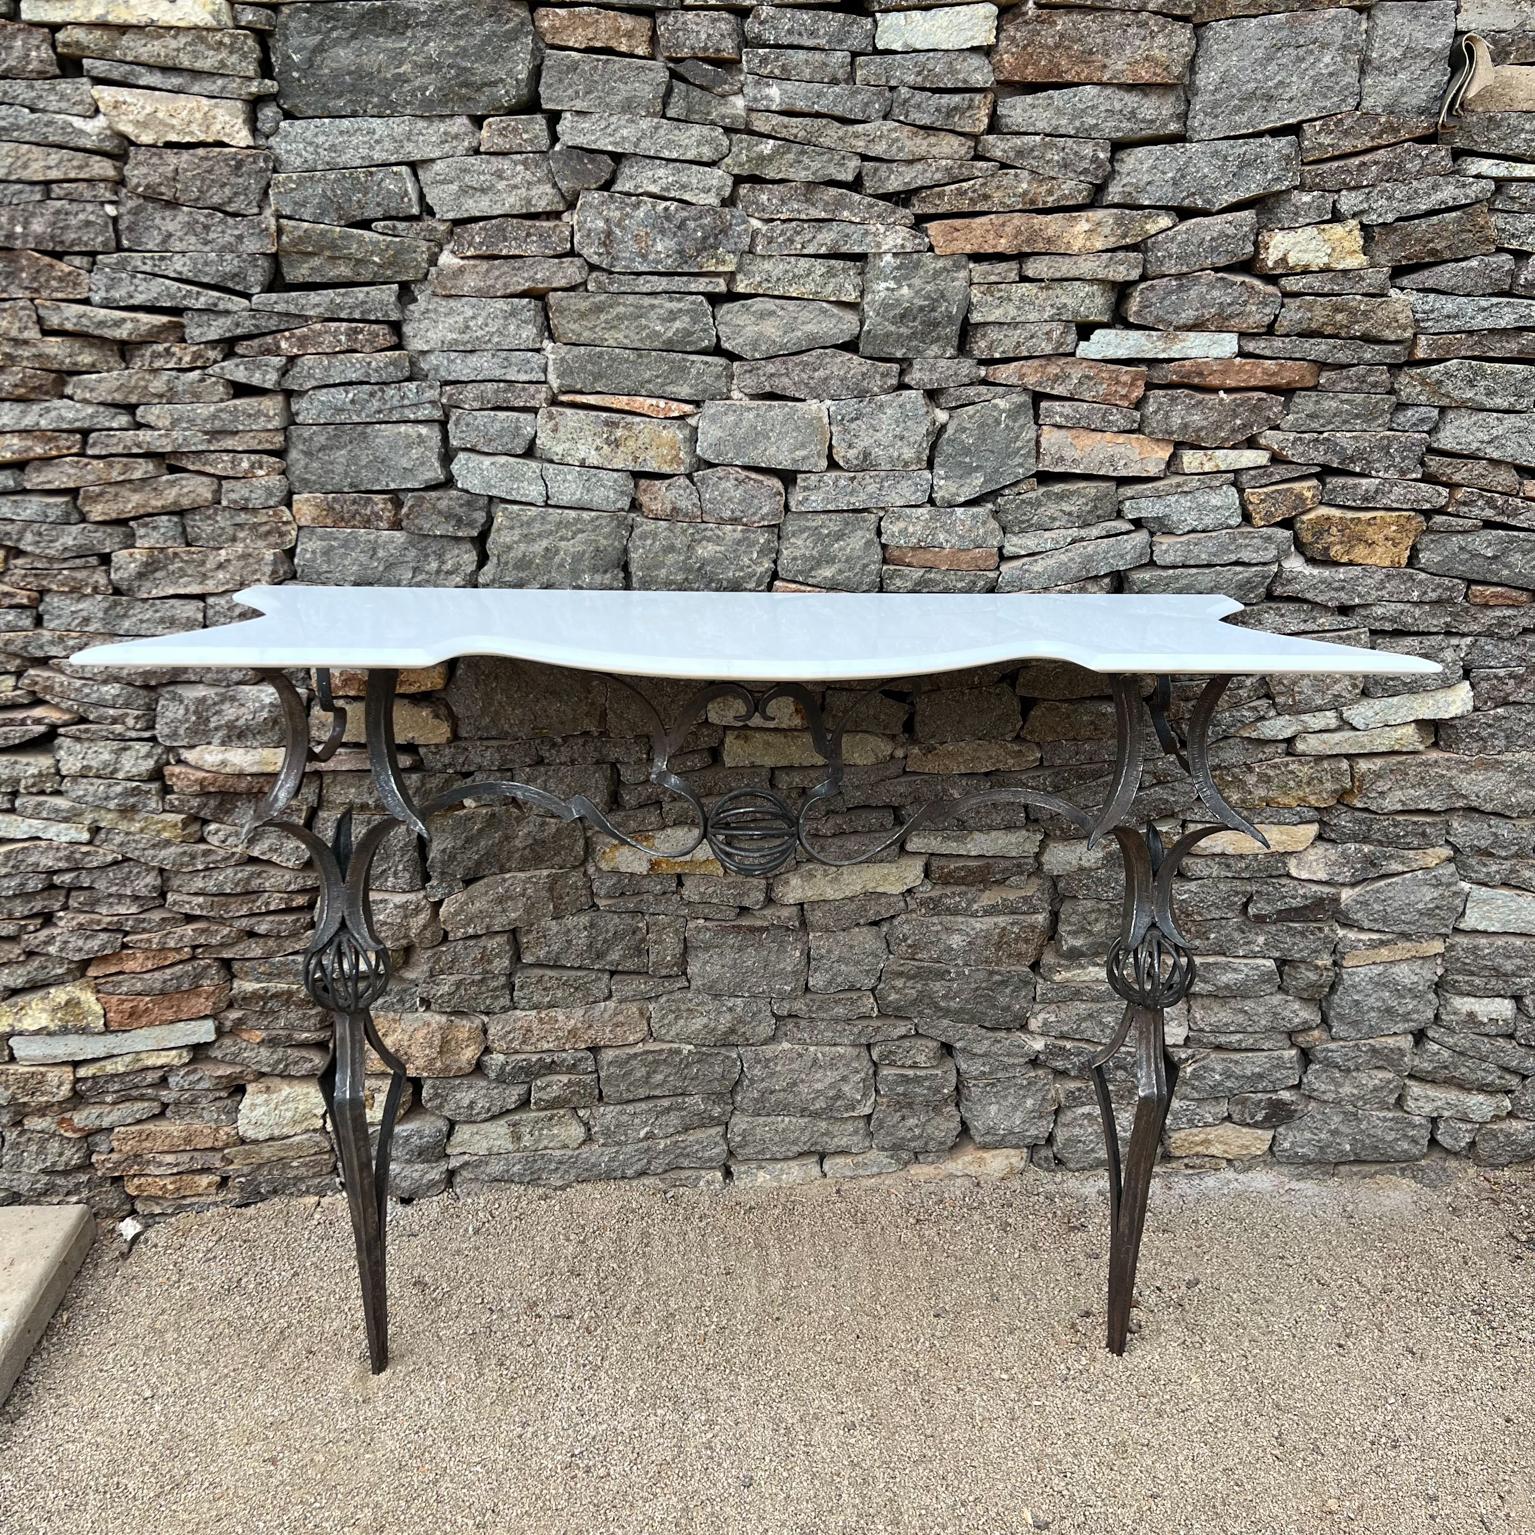 1940s Vintage Custom Italian Wrought iron marble console table 
Design style after Gilbert Poillerat
Shows Poillerat type stylized hand forged wrought iron base
Unmarked
Features new marble stone top, custom design with beveled edge.
Console